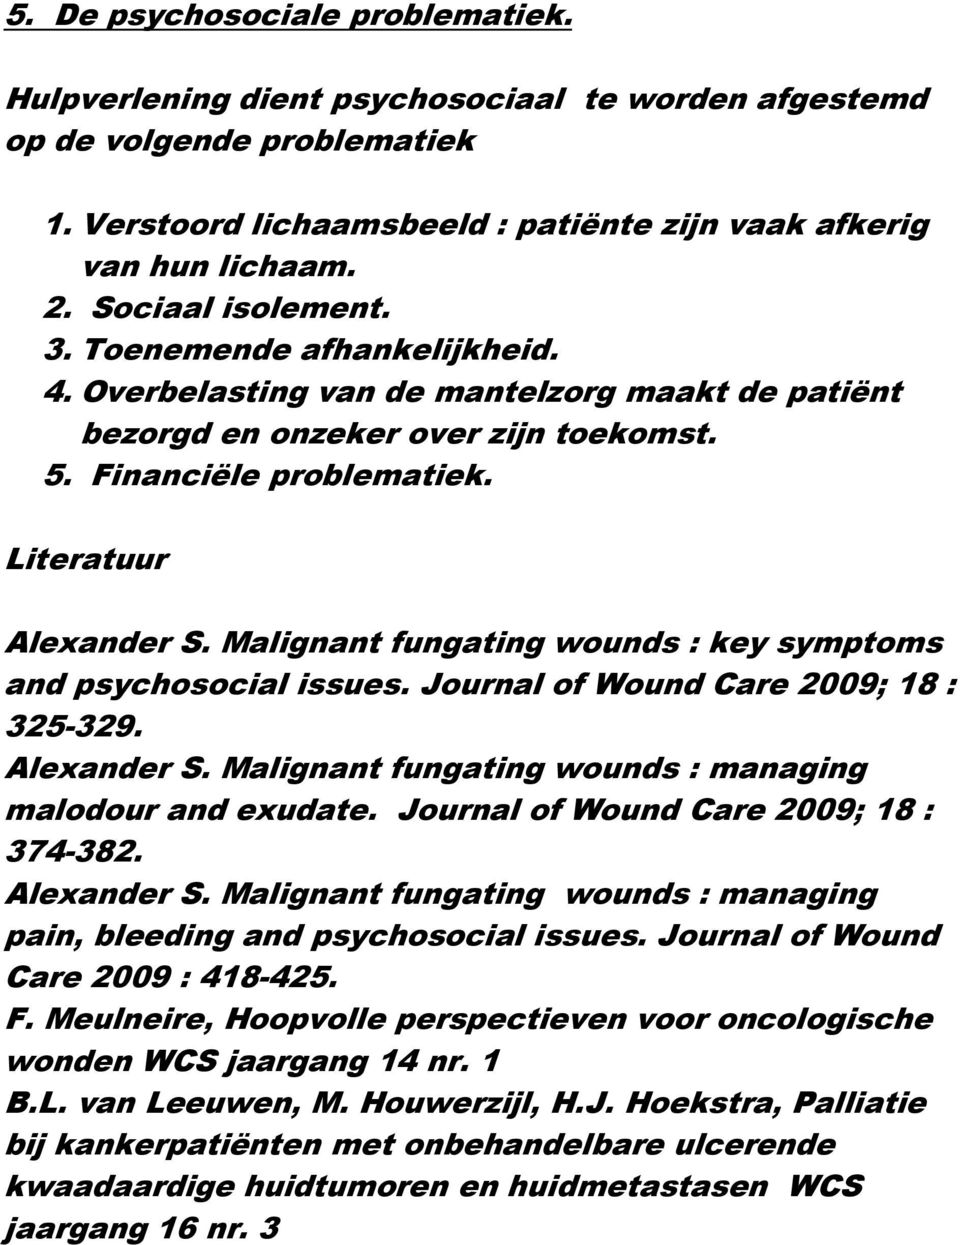 Malignant fungating wounds : key symptoms and psychosocial issues. Journal of Wound Care 2009; 18 : 325-329. Alexander S. Malignant fungating wounds : managing malodour and exudate.